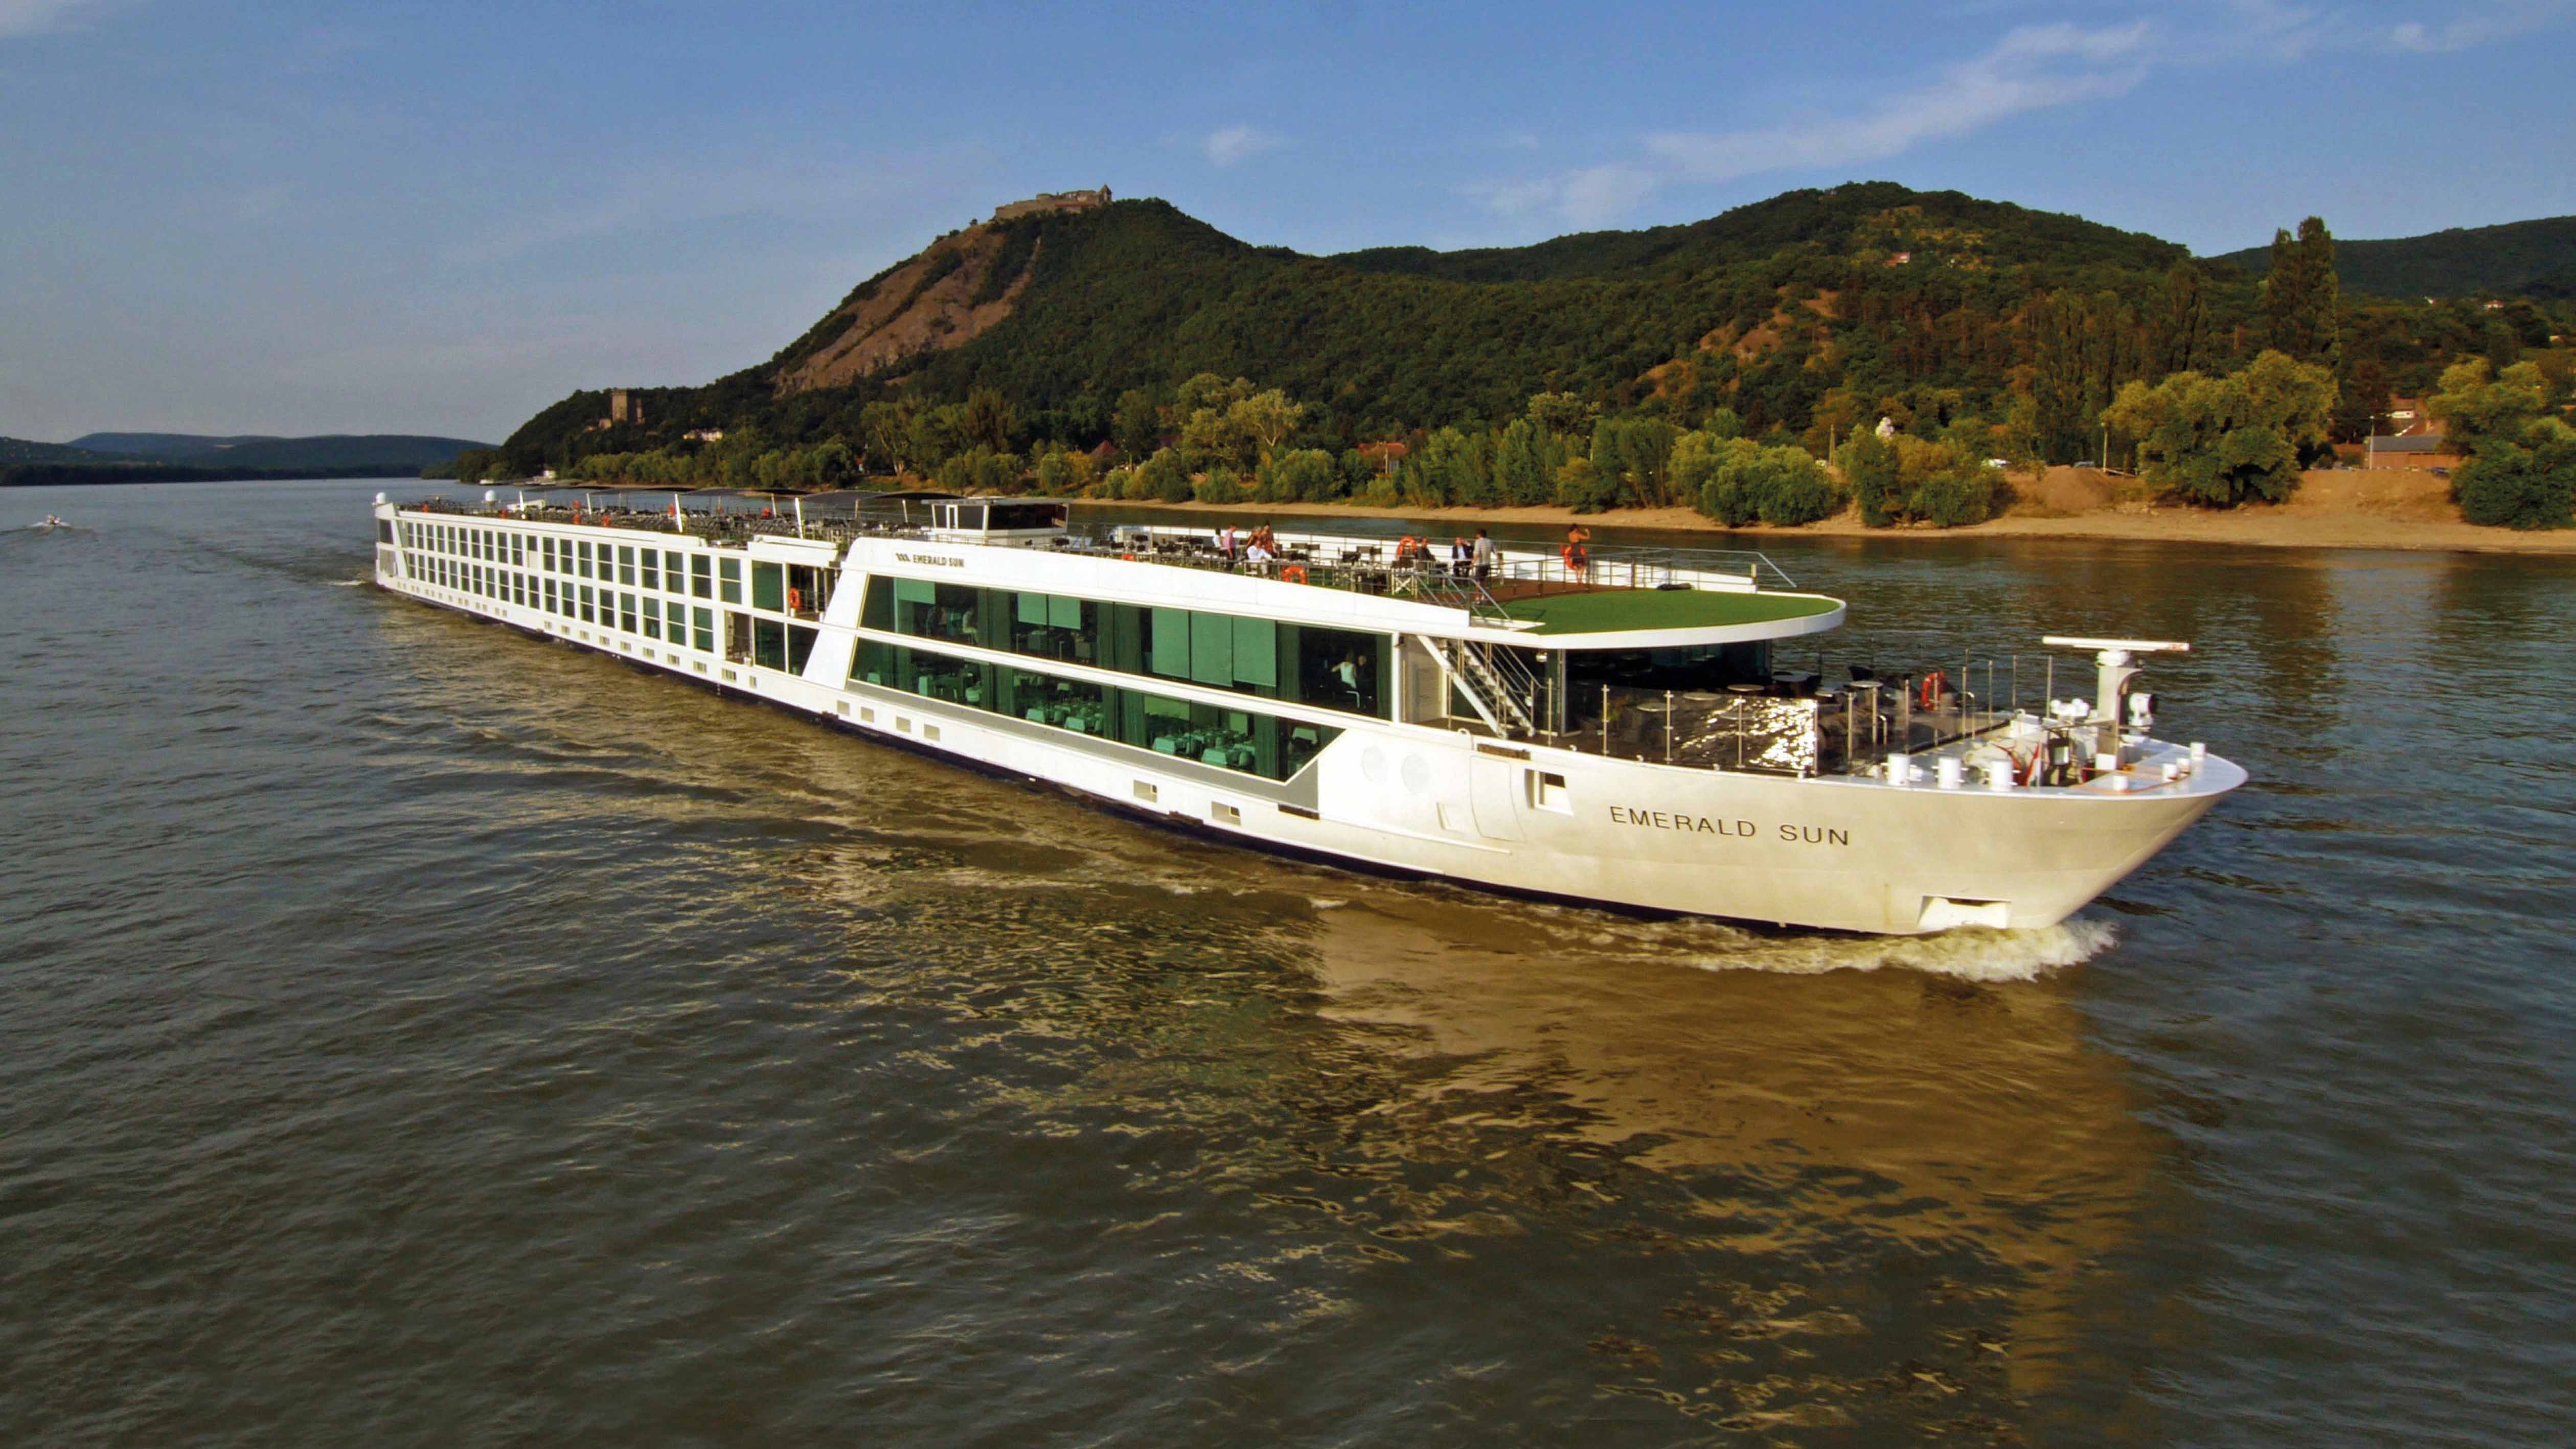 Luxury river cruise ship sailing on the rippling water past green, hilly land in Europe under a bright blue sky